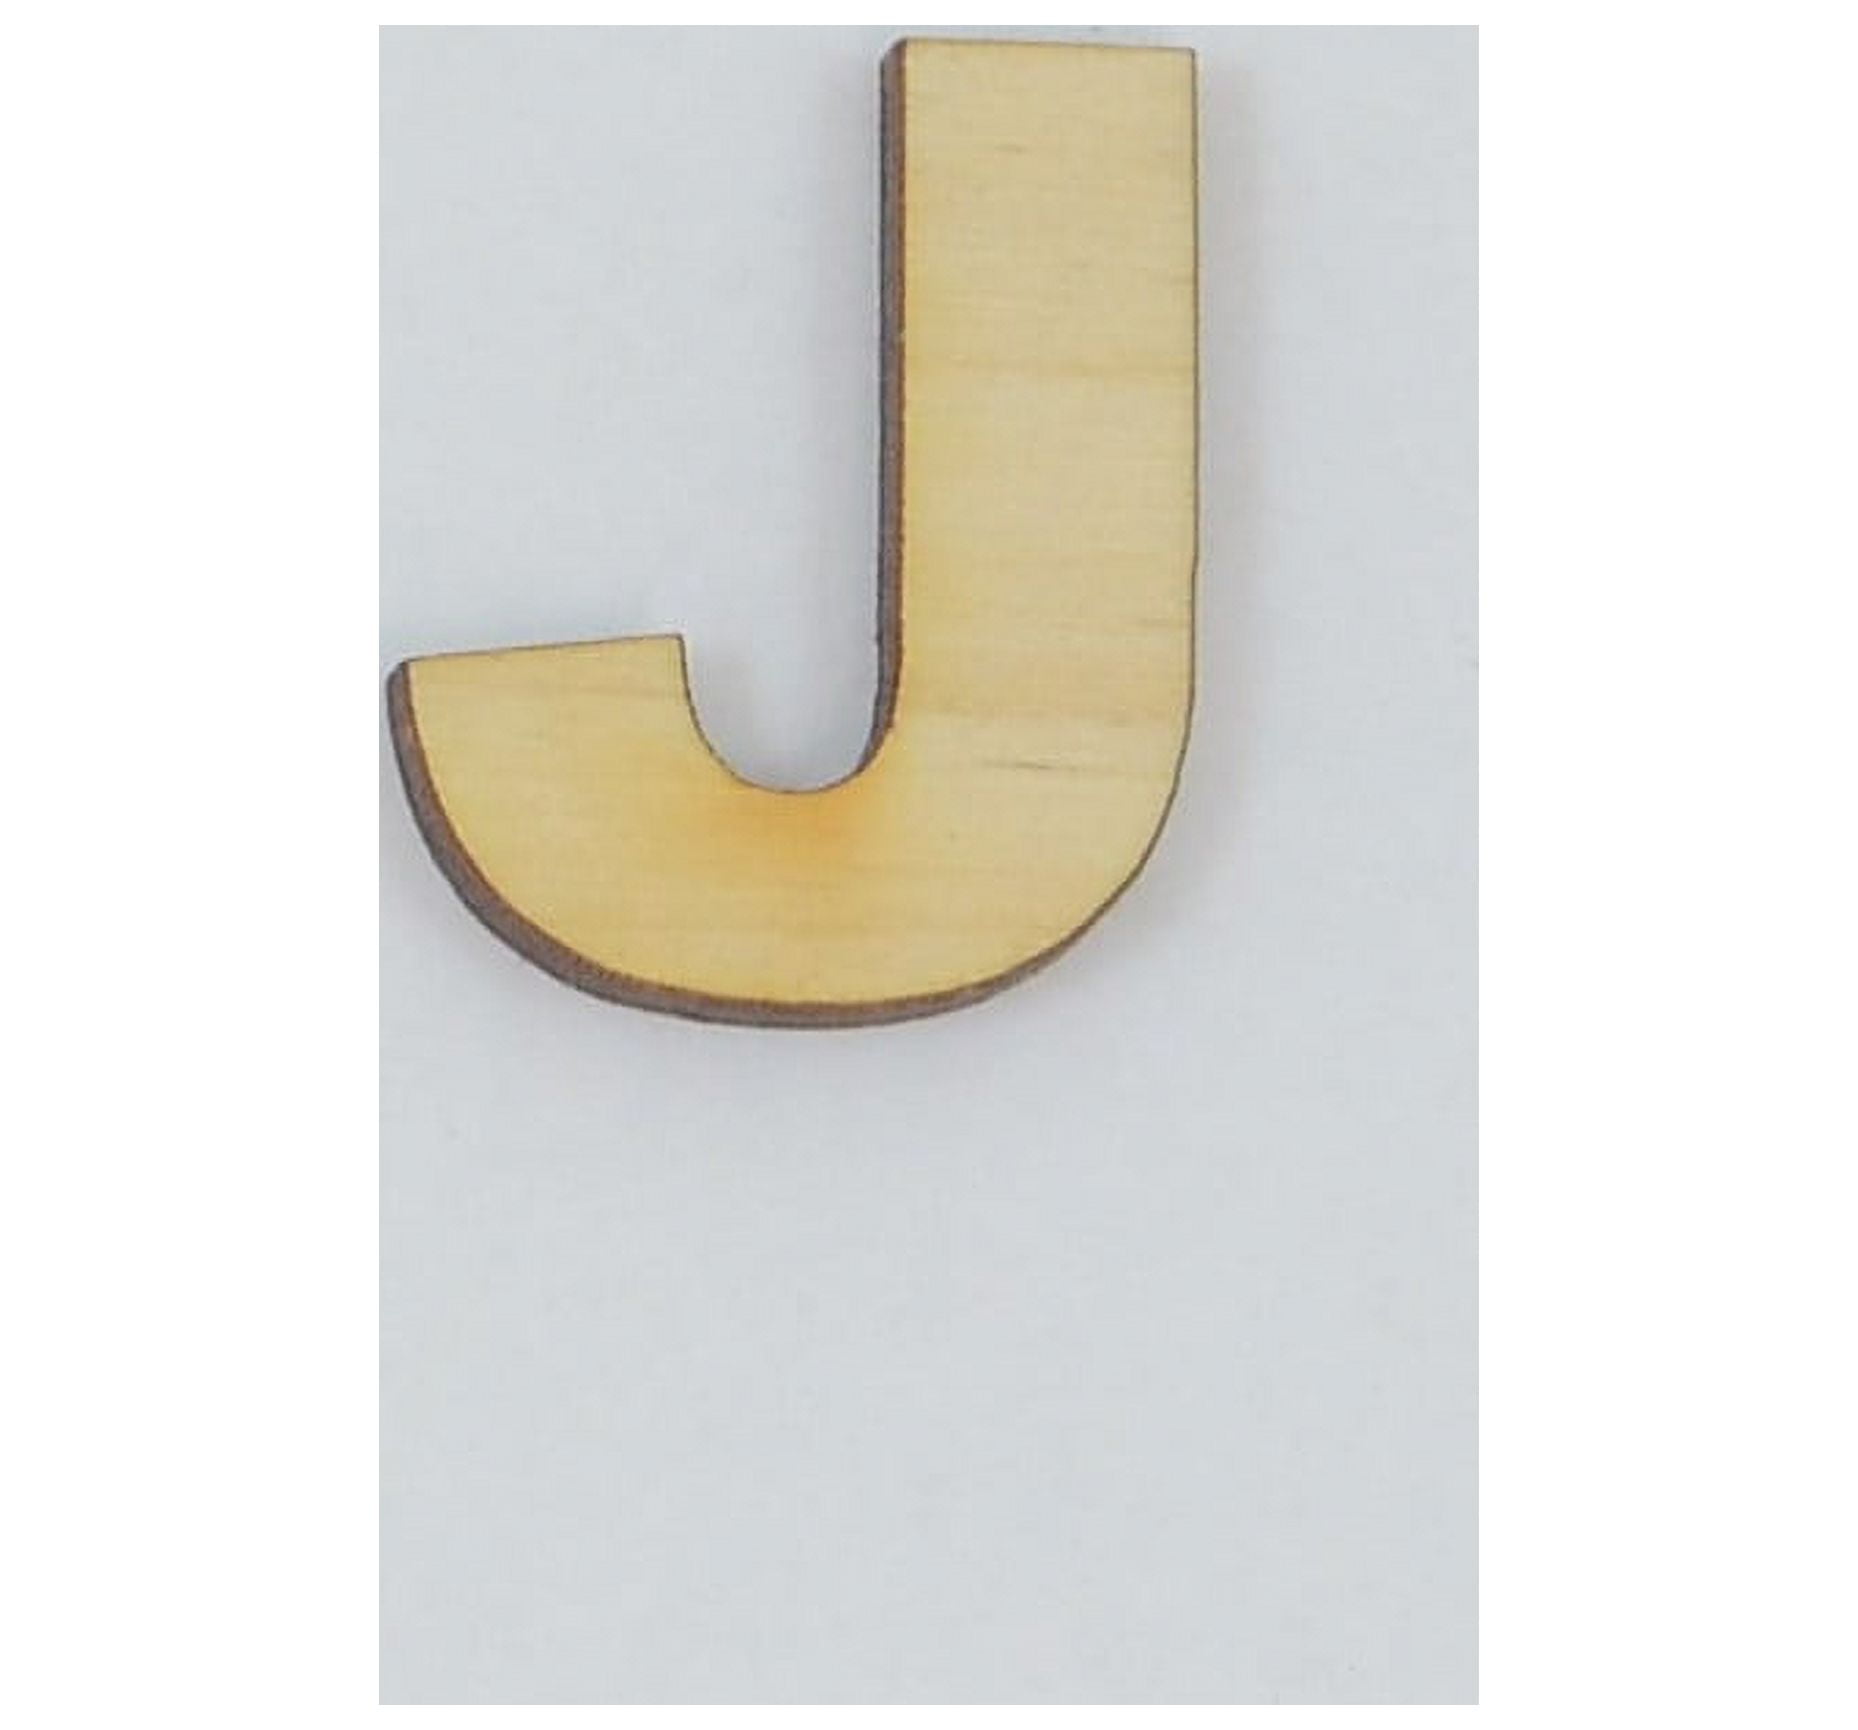  Alphabet Set A to Z Wooden Letters 1/4 Thick 4 Long About  3-1/4'' Wide Letter “A to Z” Unfinished Plywood Letter (26 Letters)